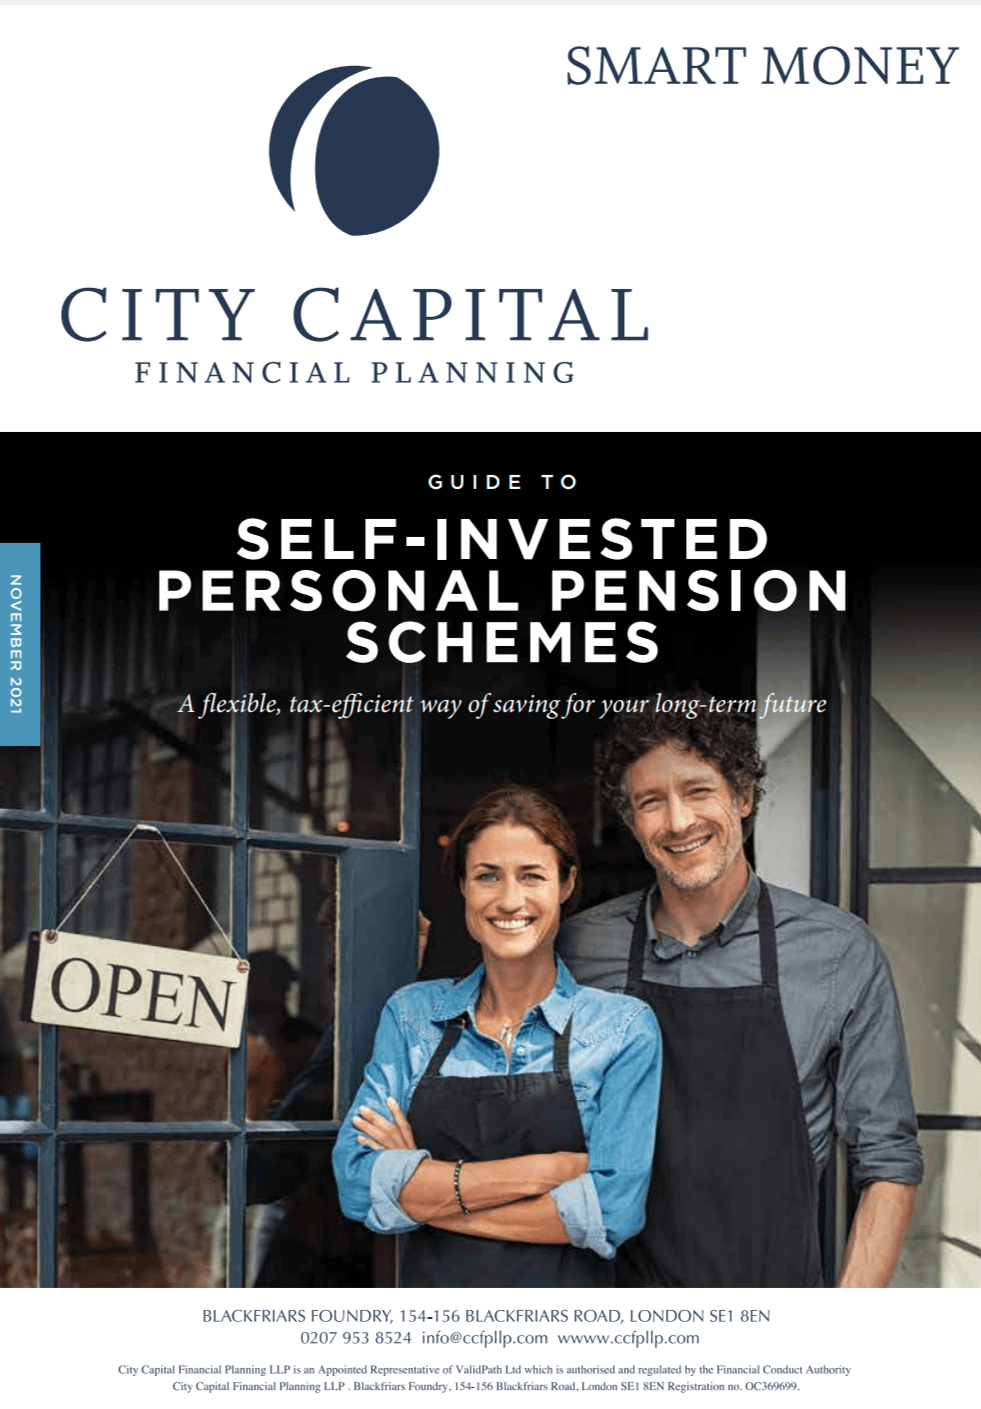 Guide to Self-Invested Personal Pension Schemes